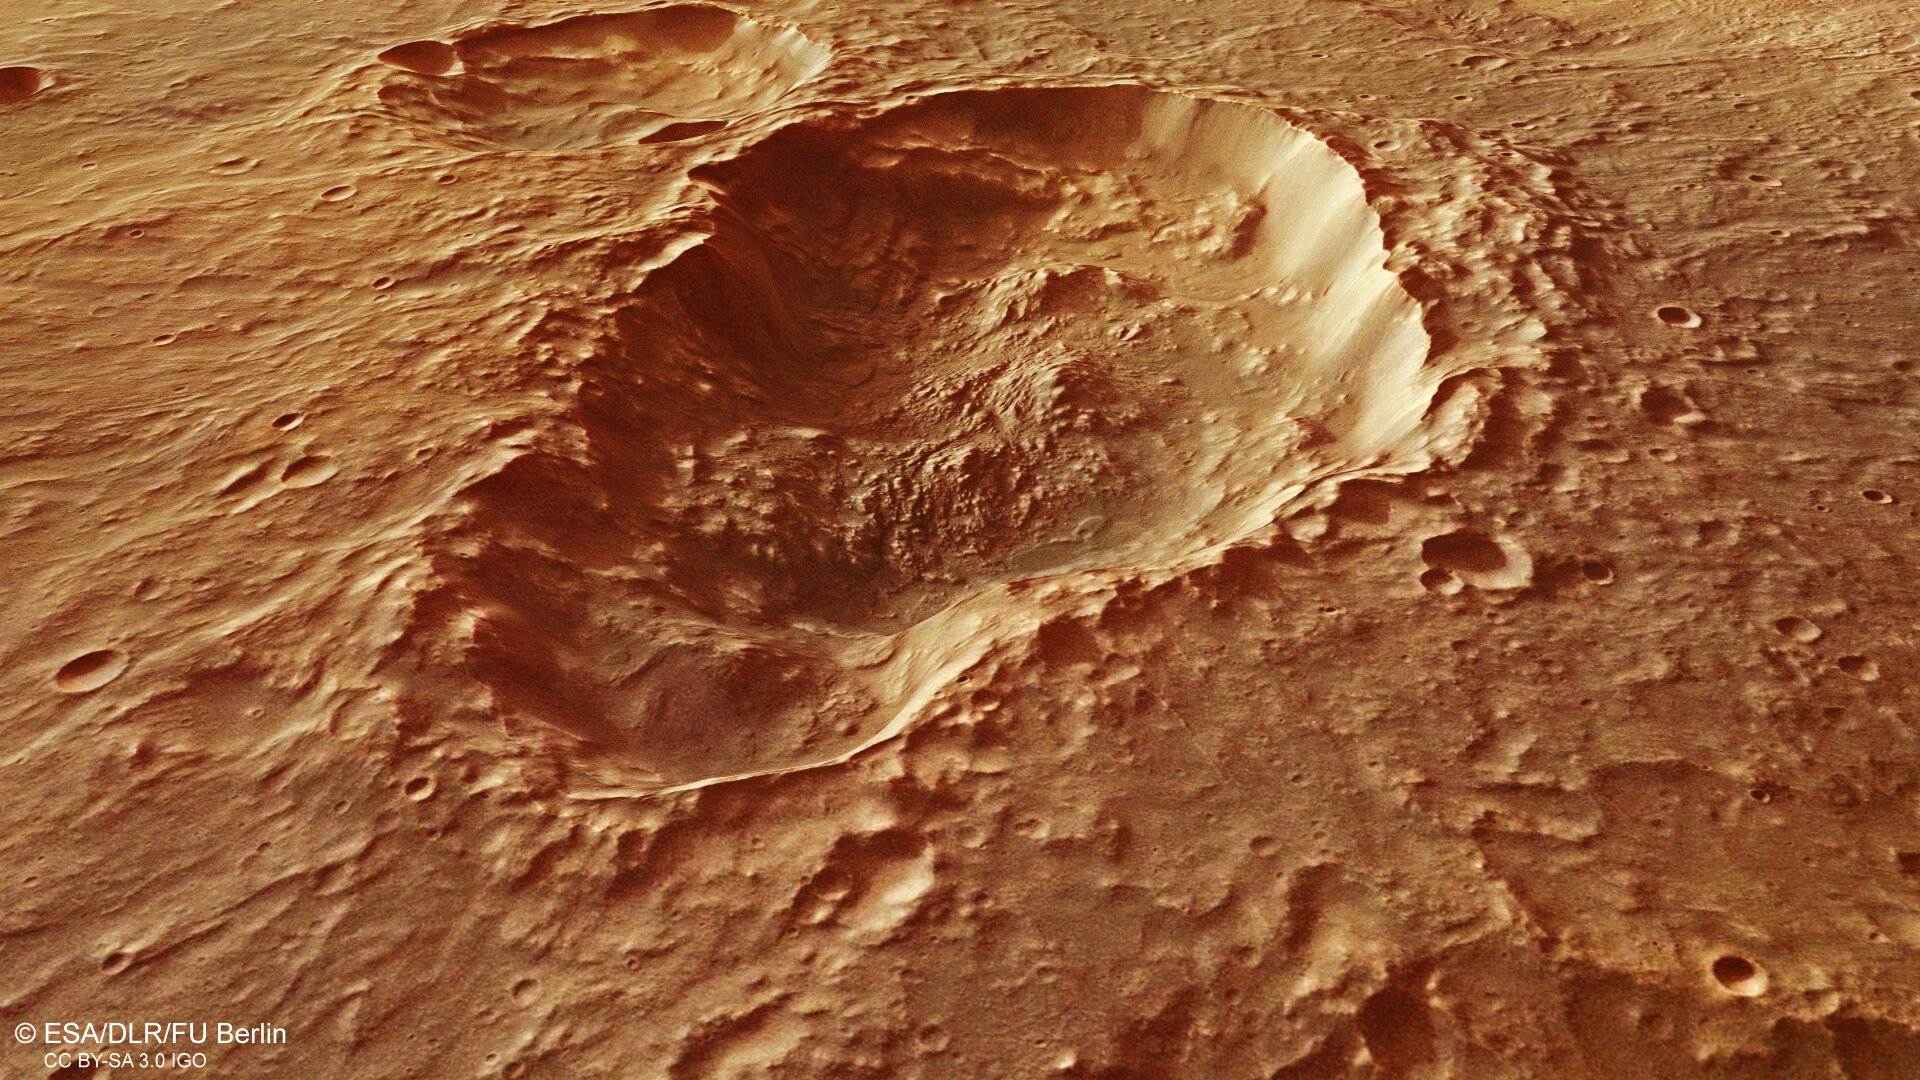 Perspective view across a triple crater